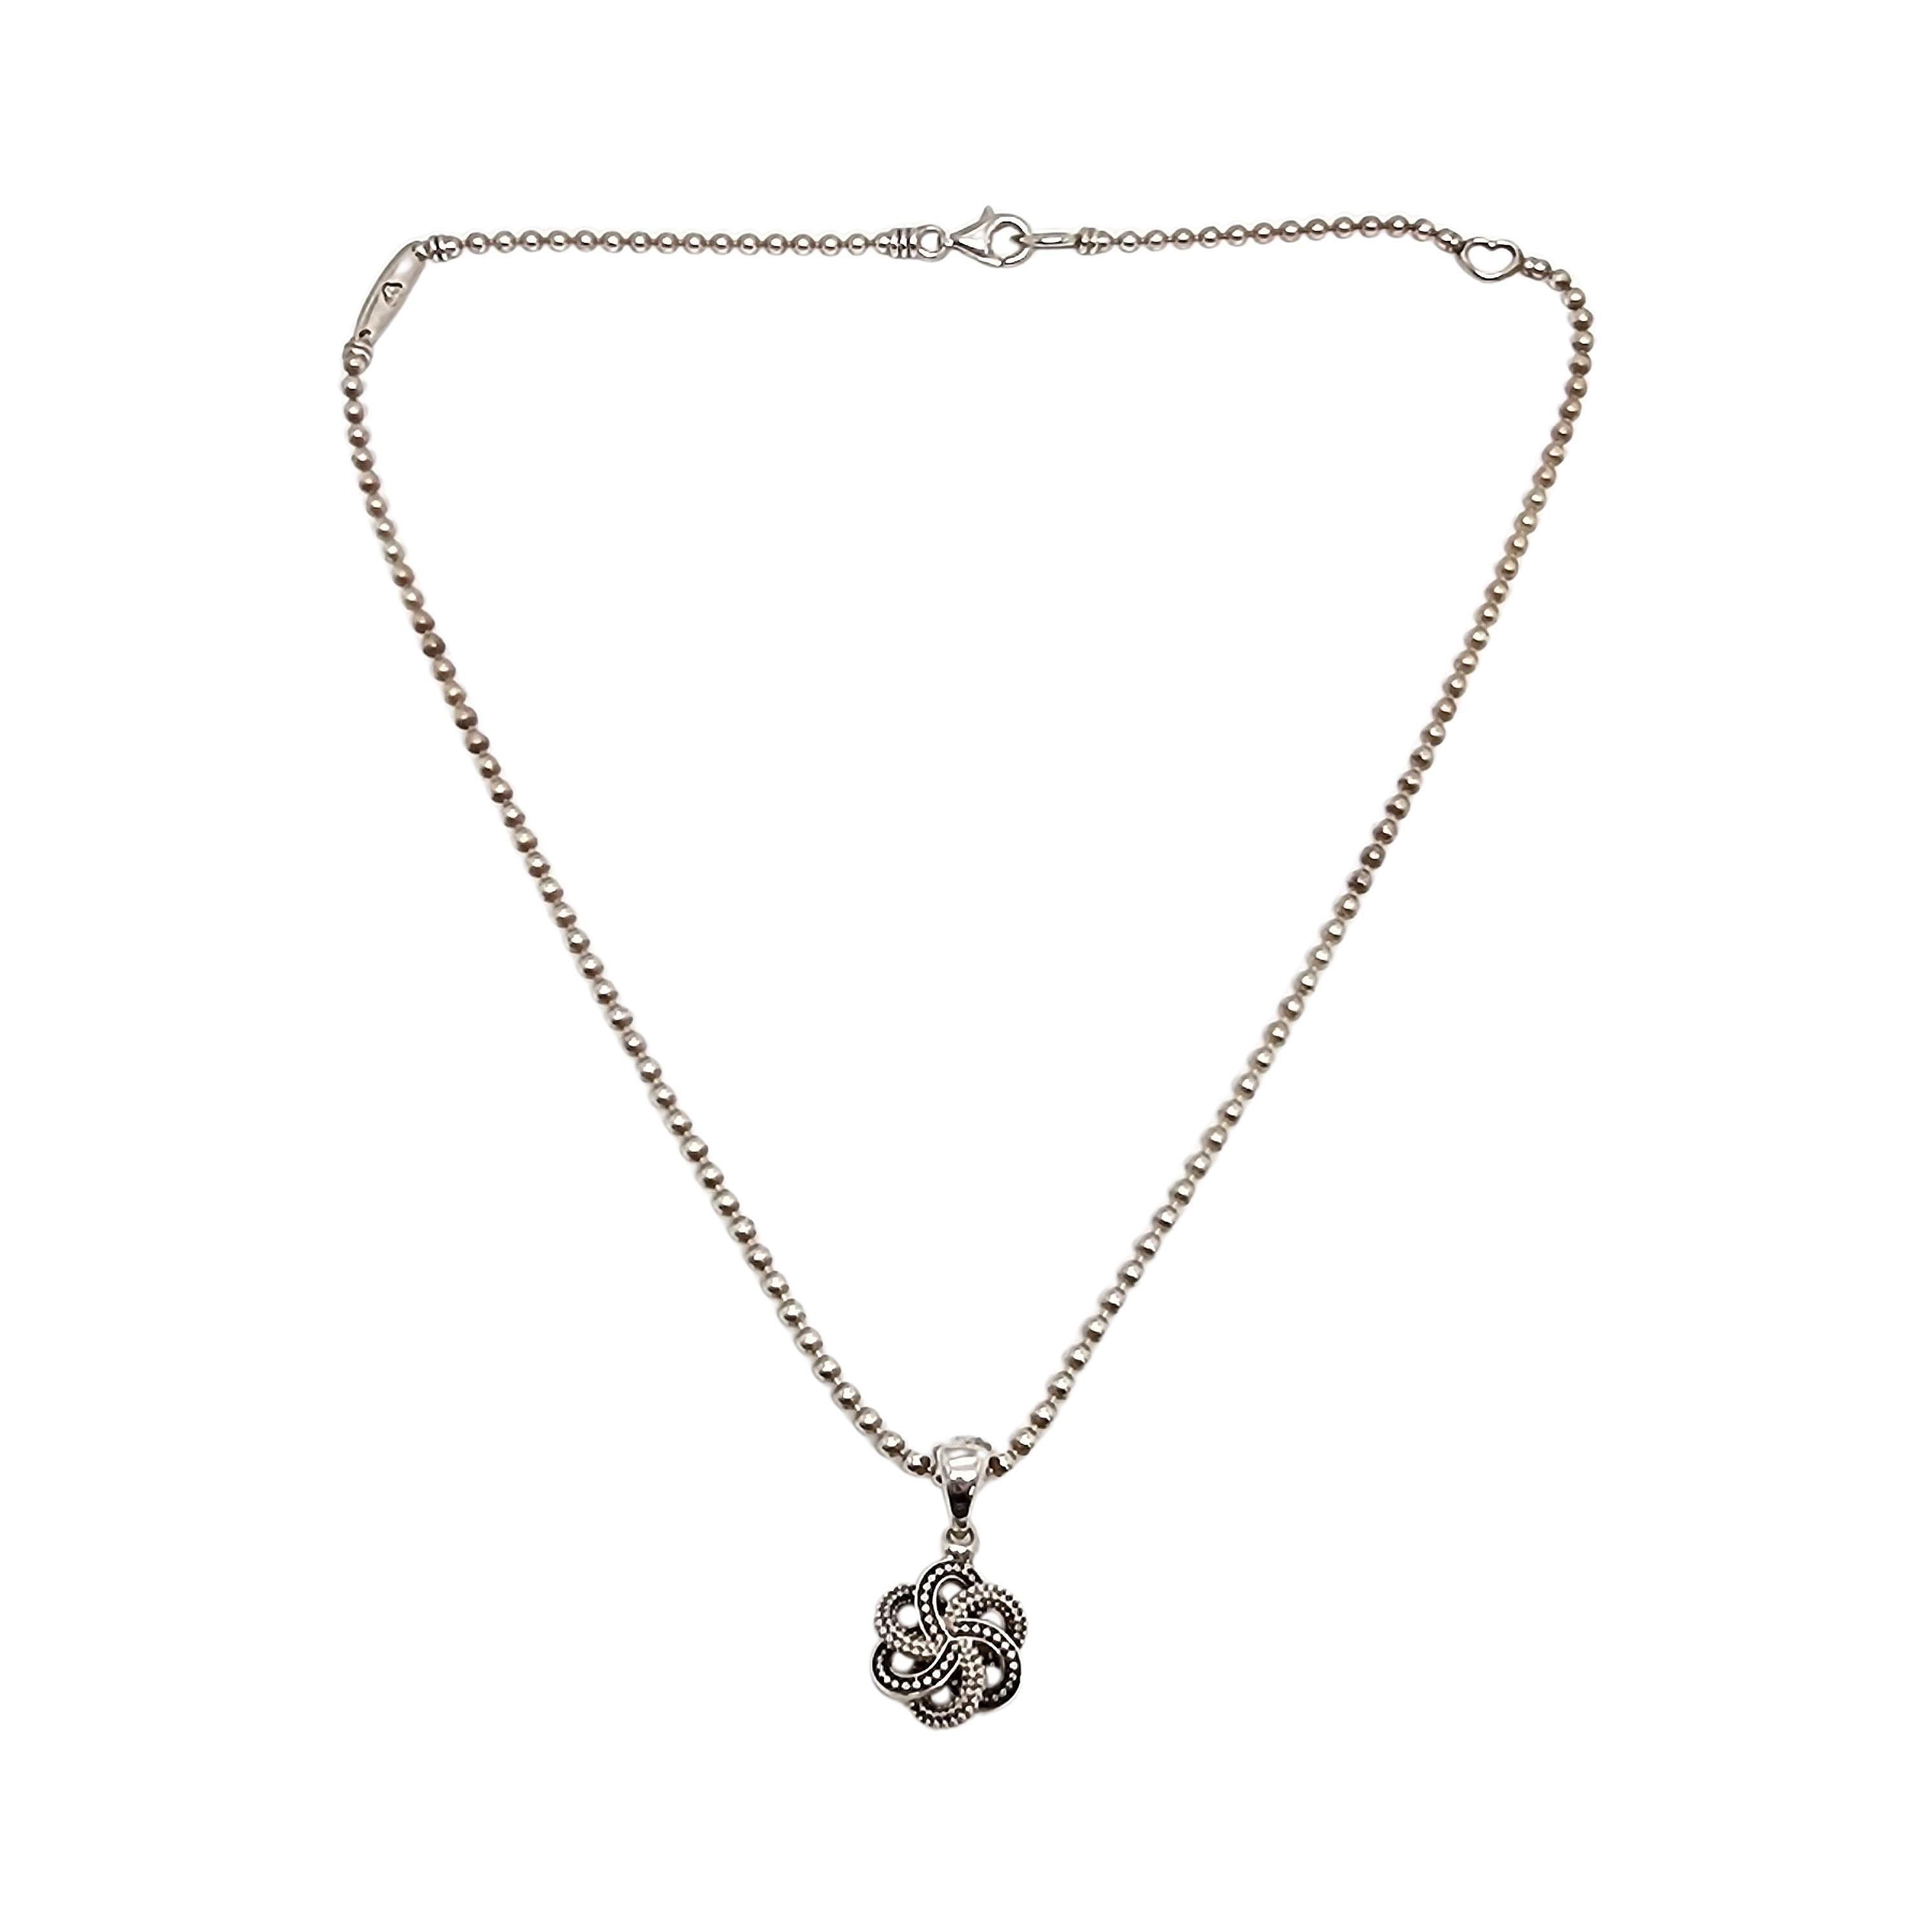 Lagos Caviar sterling silver 18K plated 2-tone Love Knot pendant ball chain necklace, with box and pouch.

Beautiful caviar texture two tone knot pendant featuring 18K yellow gold plated accents on an adjustable length bead ball chain. Includes a